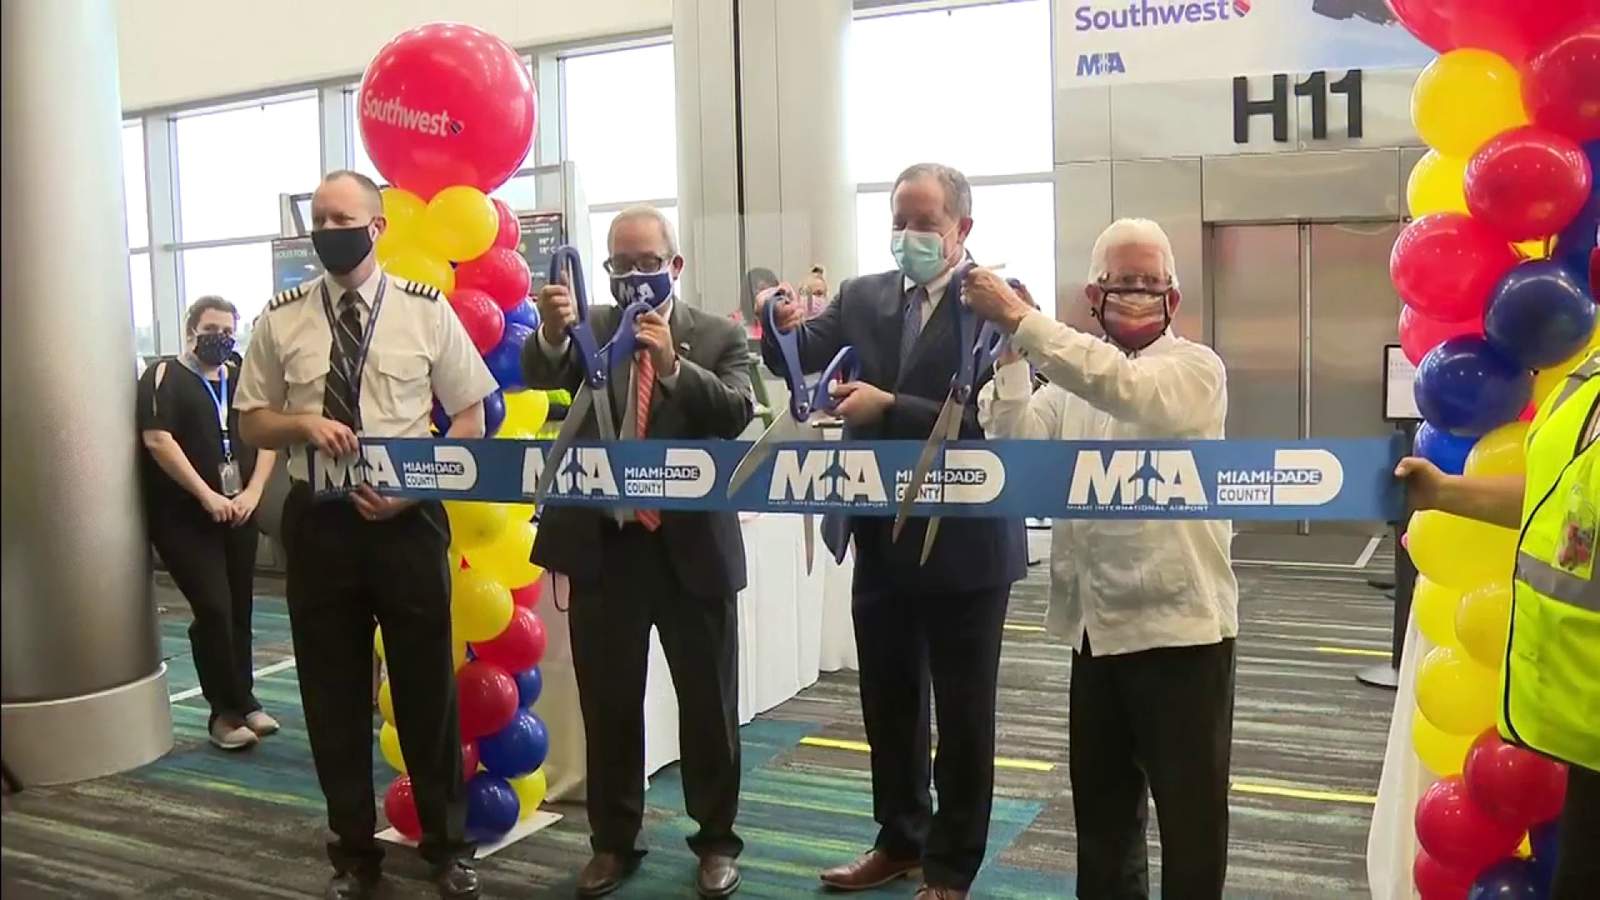 Southwest Airlines begins flying out of Miami International Airport as Thanksgiving travel boom approaches